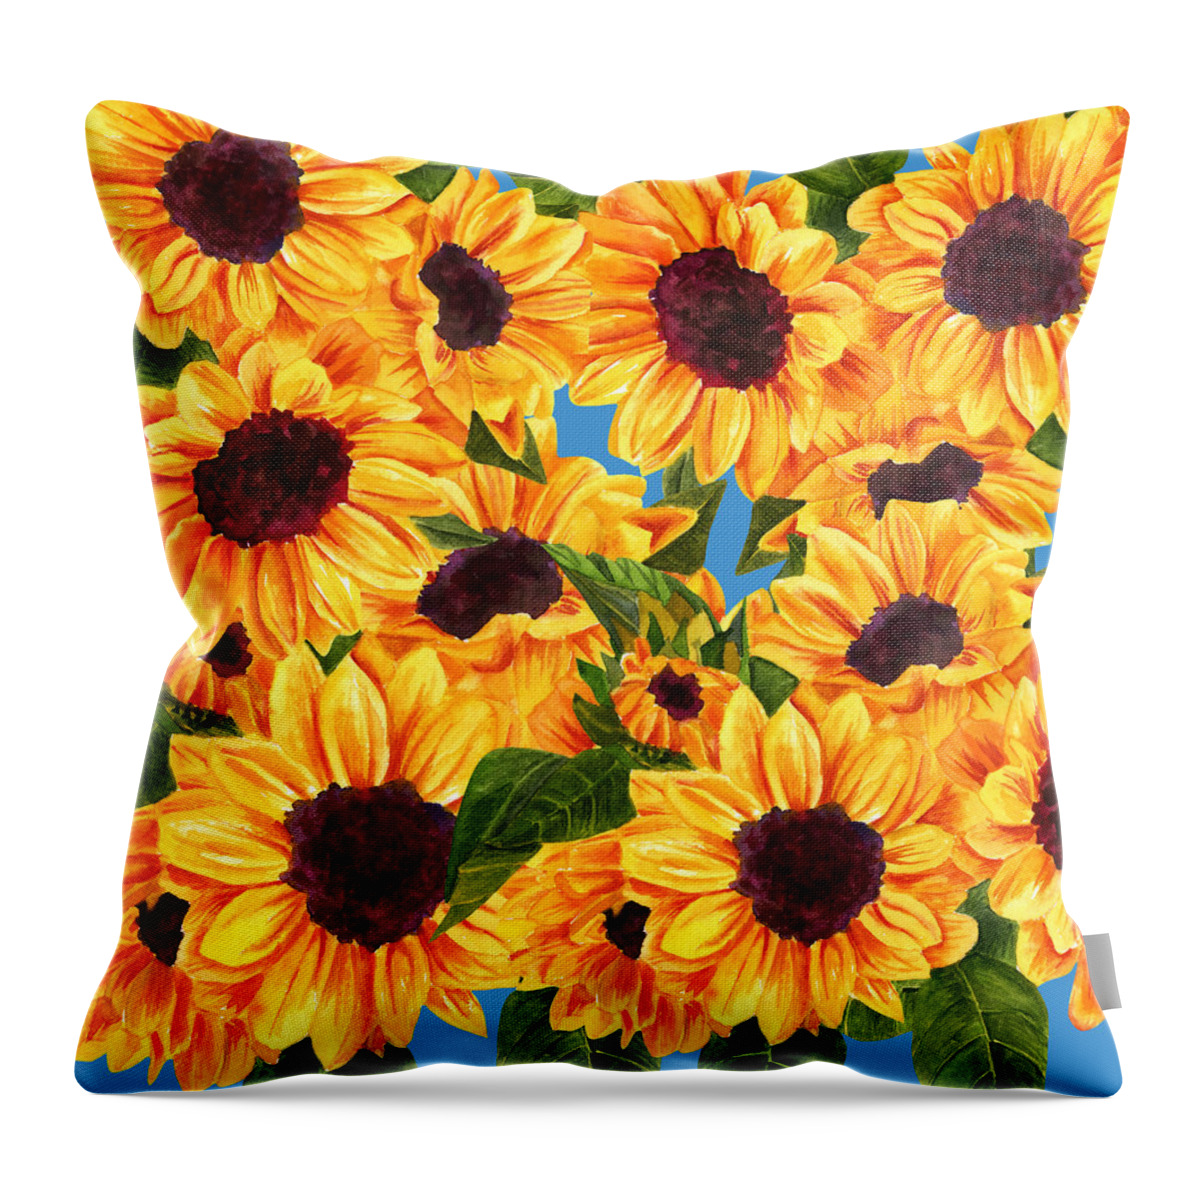 Sunflower Throw Pillow featuring the digital art Happy Sunflowers by Linda Bailey